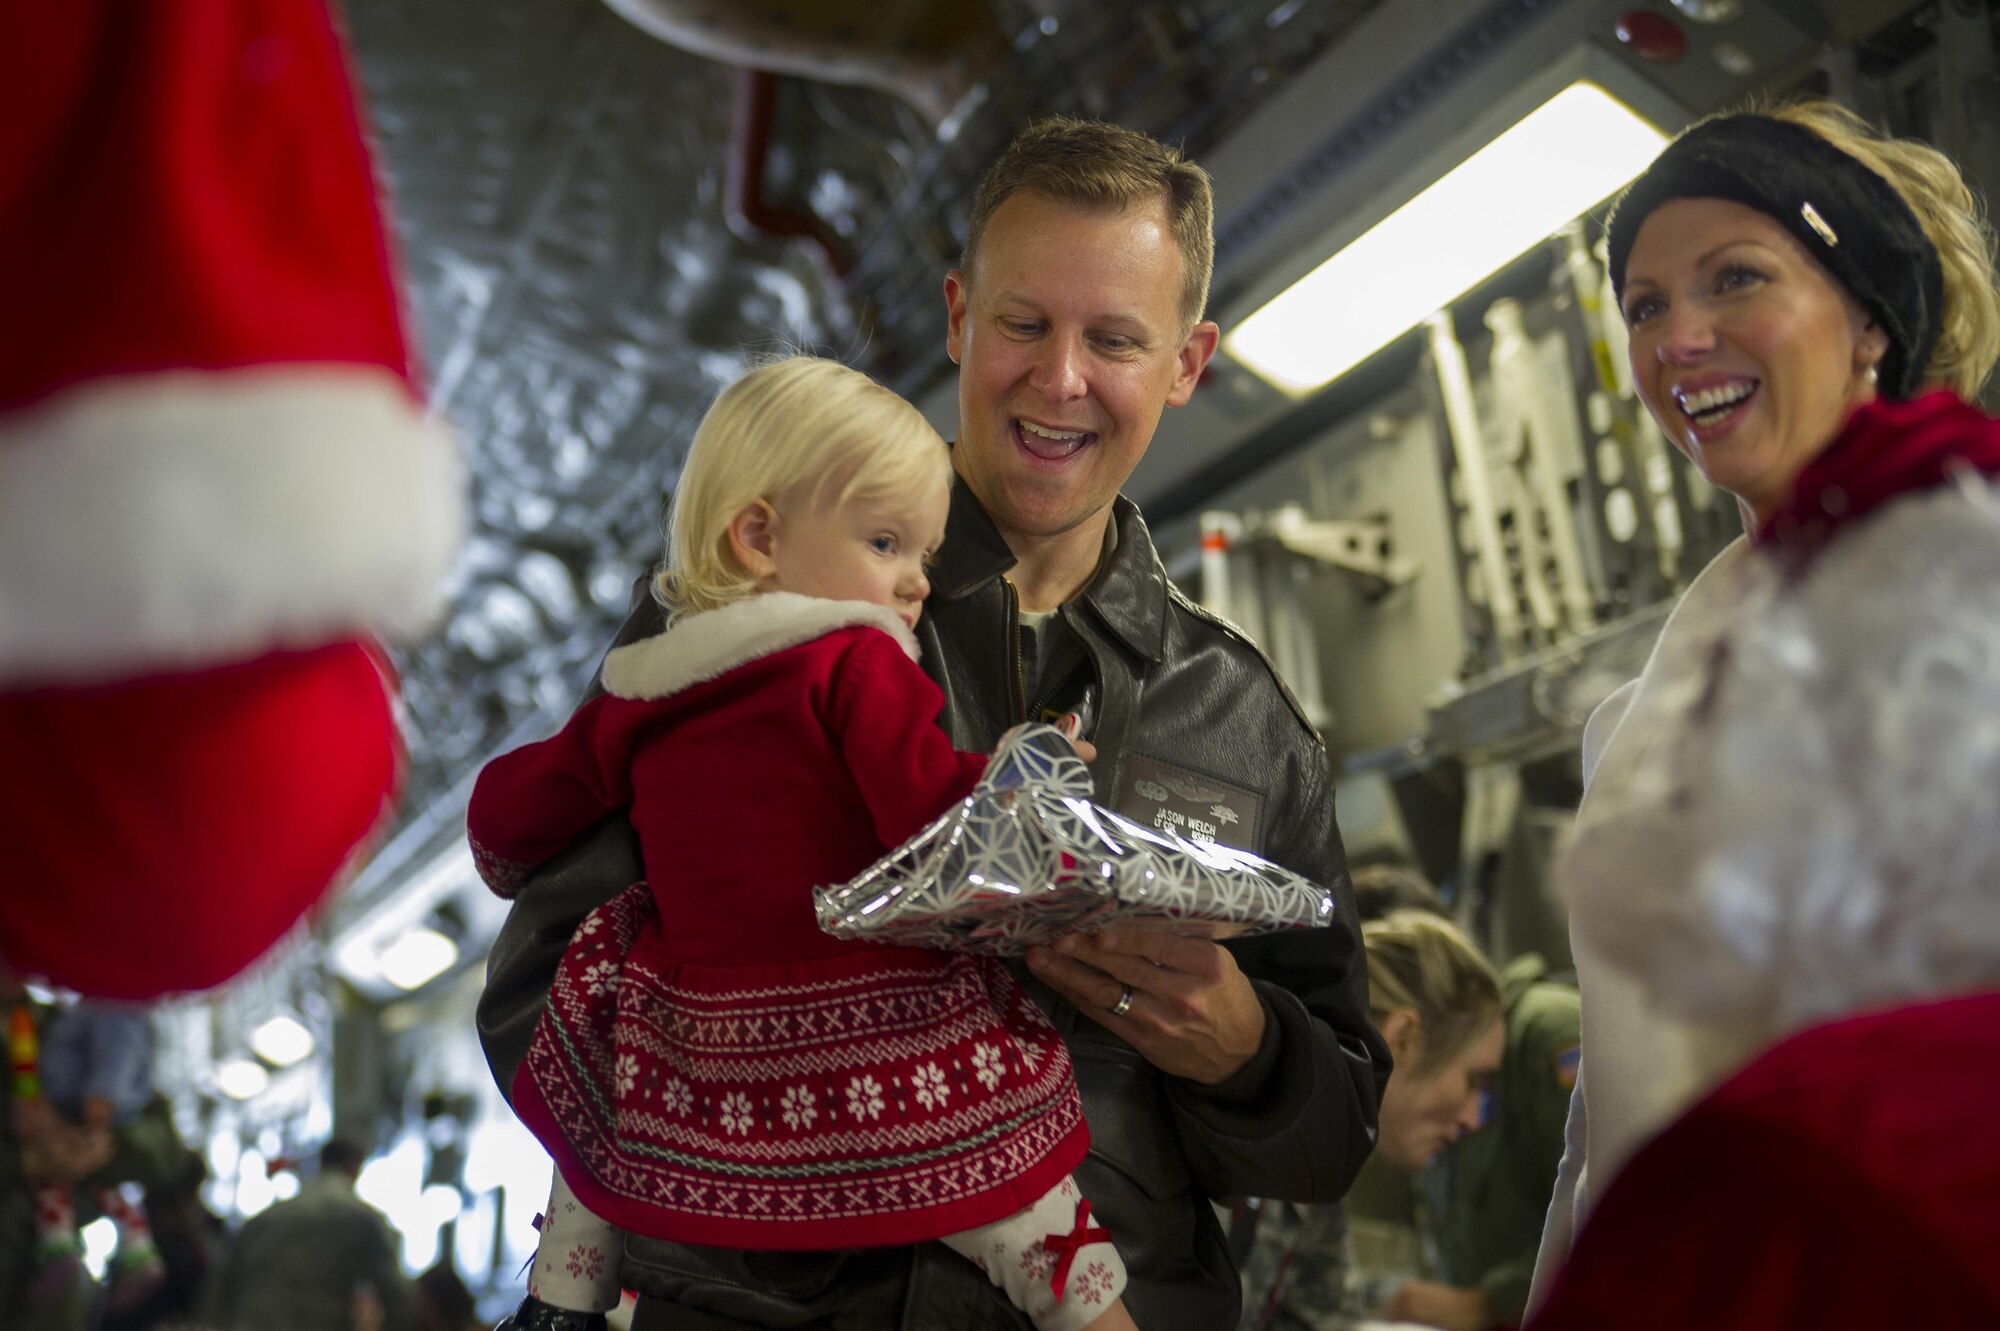 Members of the 315th Operations Group, along with their family and friends, enjoy a visit from Santa Claus Dec. 3, 2016 at Joint Base Charleston, South Carolina. The event was part of an annual holiday gathering aimed at boosting morale and family wellness (U.S. Air Force photo by Senior Airman Jonathan Lane).